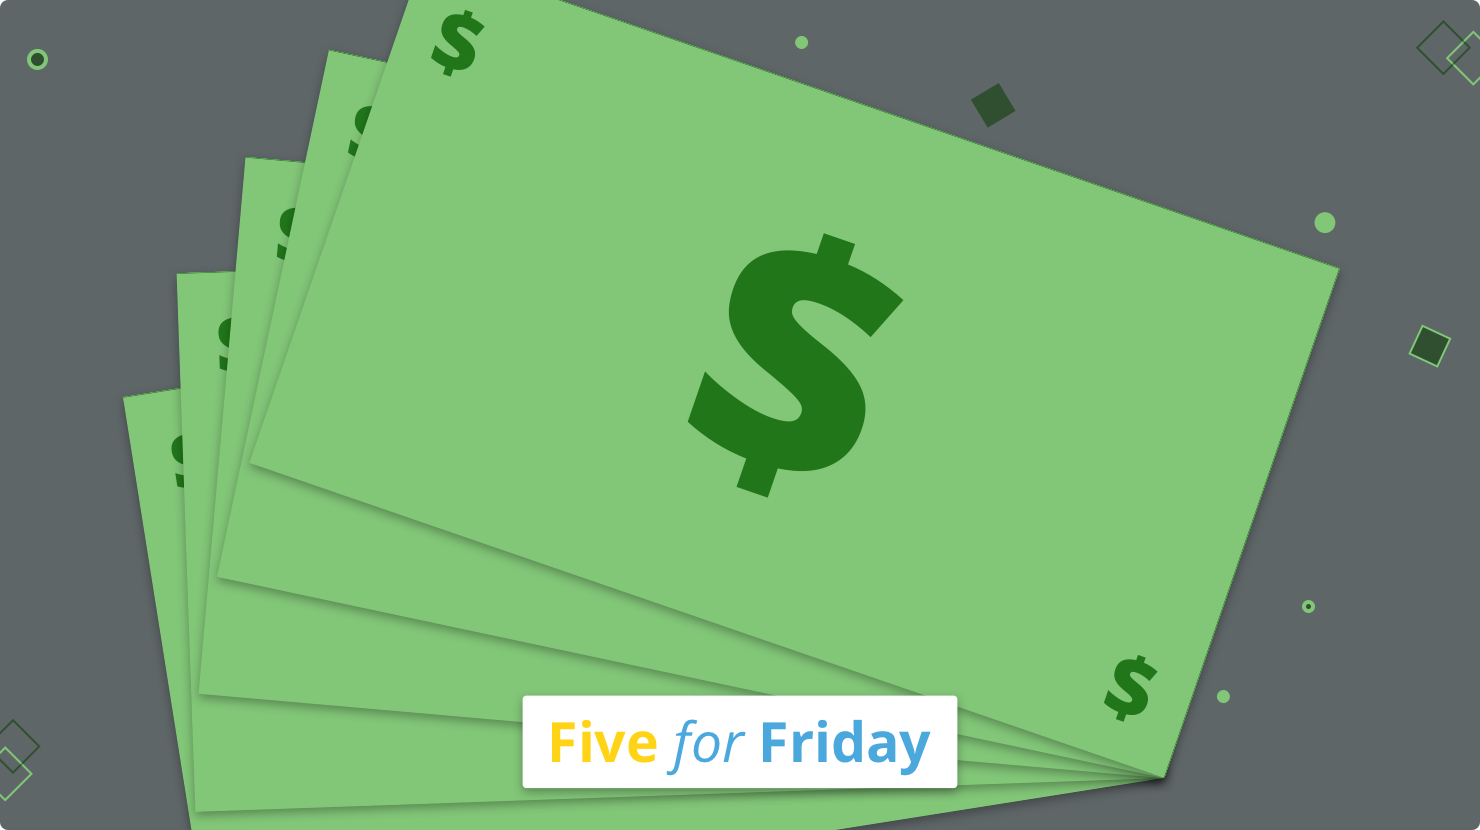 Five for Friday: Get a raise